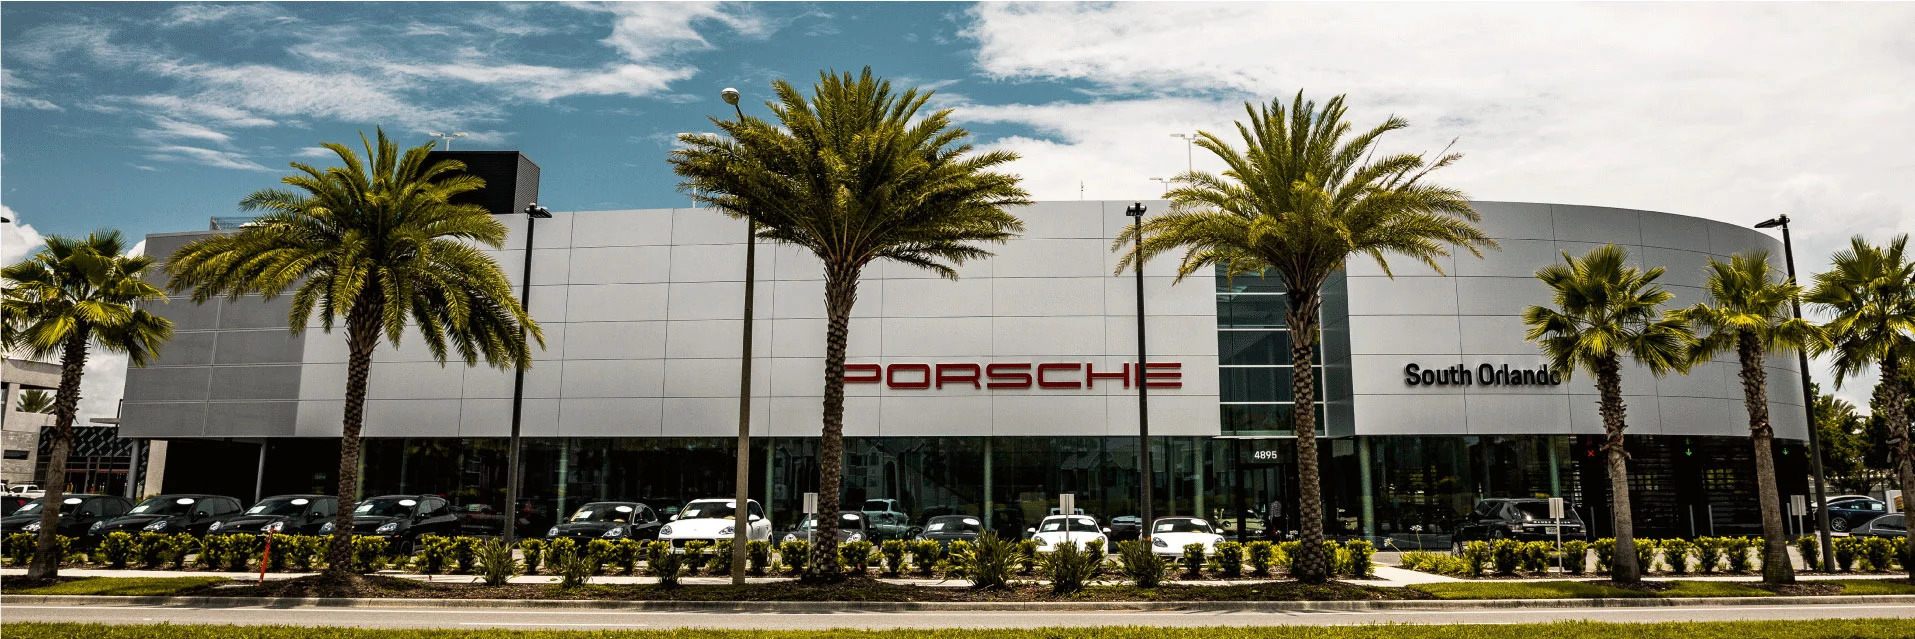 Porsche South Orlando is your Porsche Center for all Macan, Cayenne, and electric vehicle needs. Our Orlando area dealership provides sales and service that includes professional workmanship, parts, and a lifetime of factory warranties with any purchase.